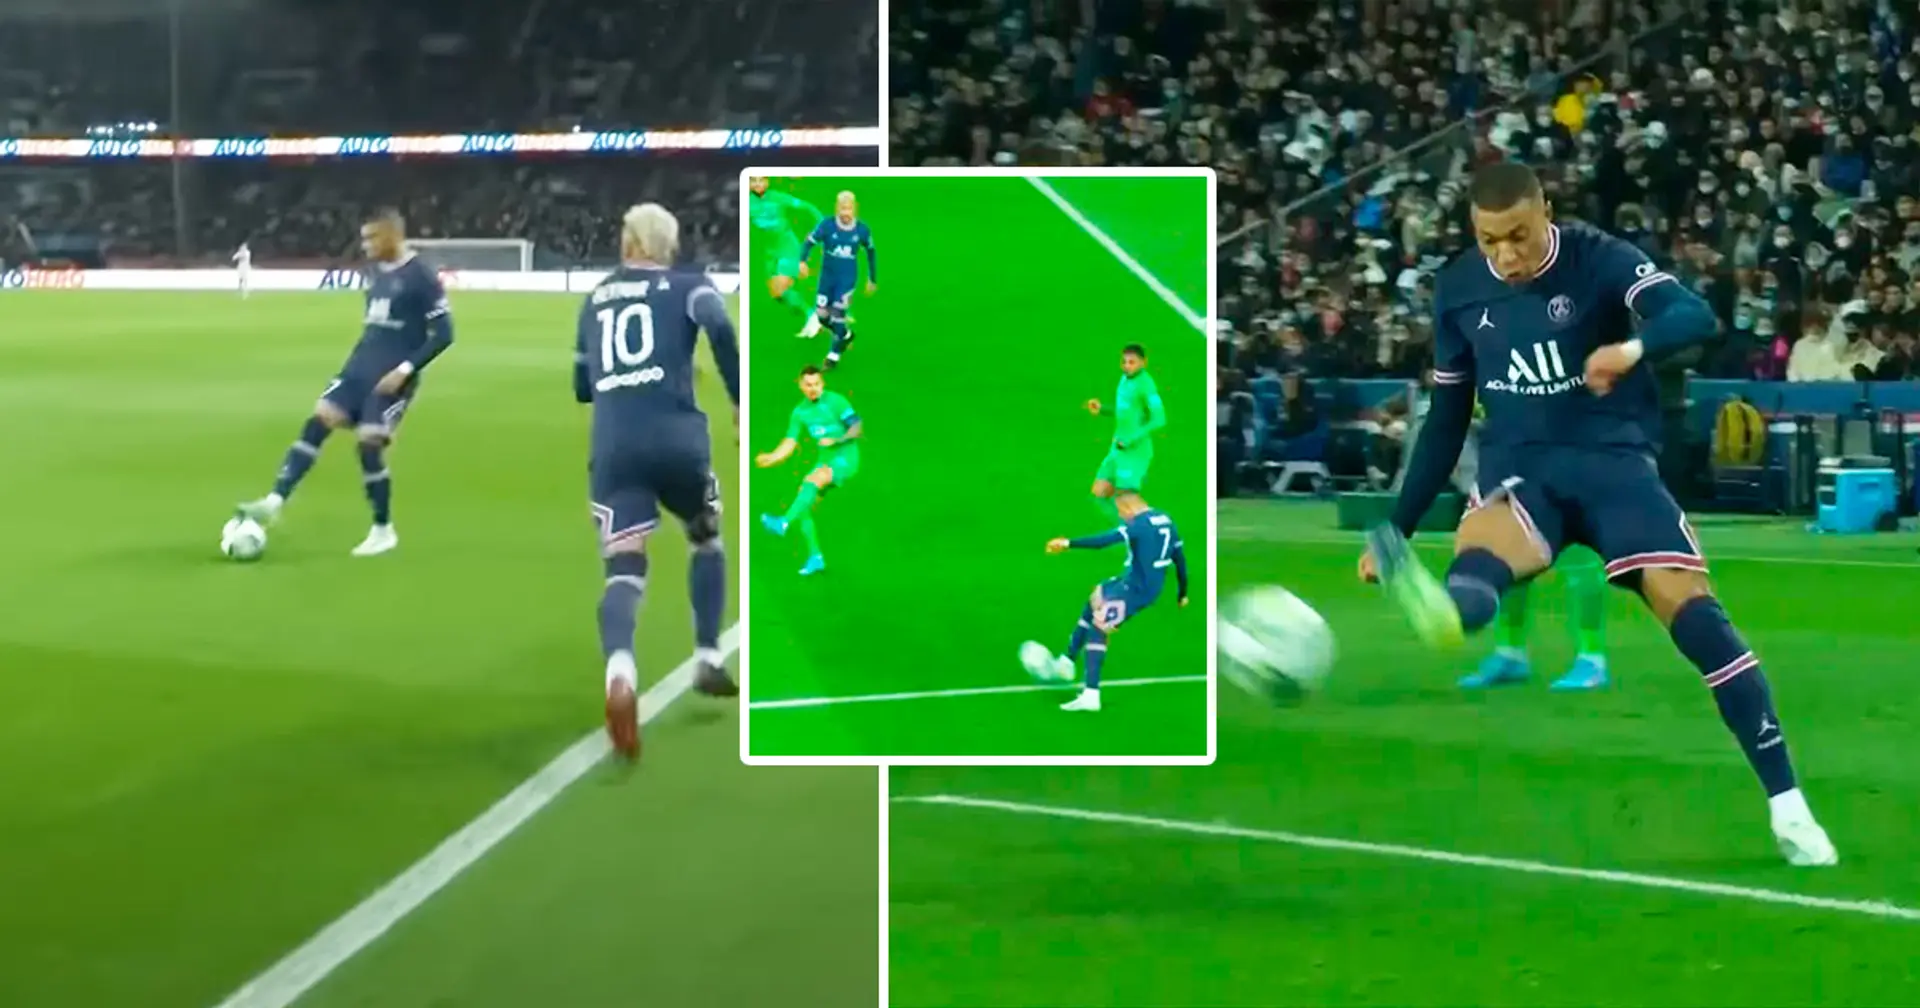 ‘That is some playstation s***’: Kylian Mbappe leaves fans speechless with outstanding trivela assist vs Saint-Etienne